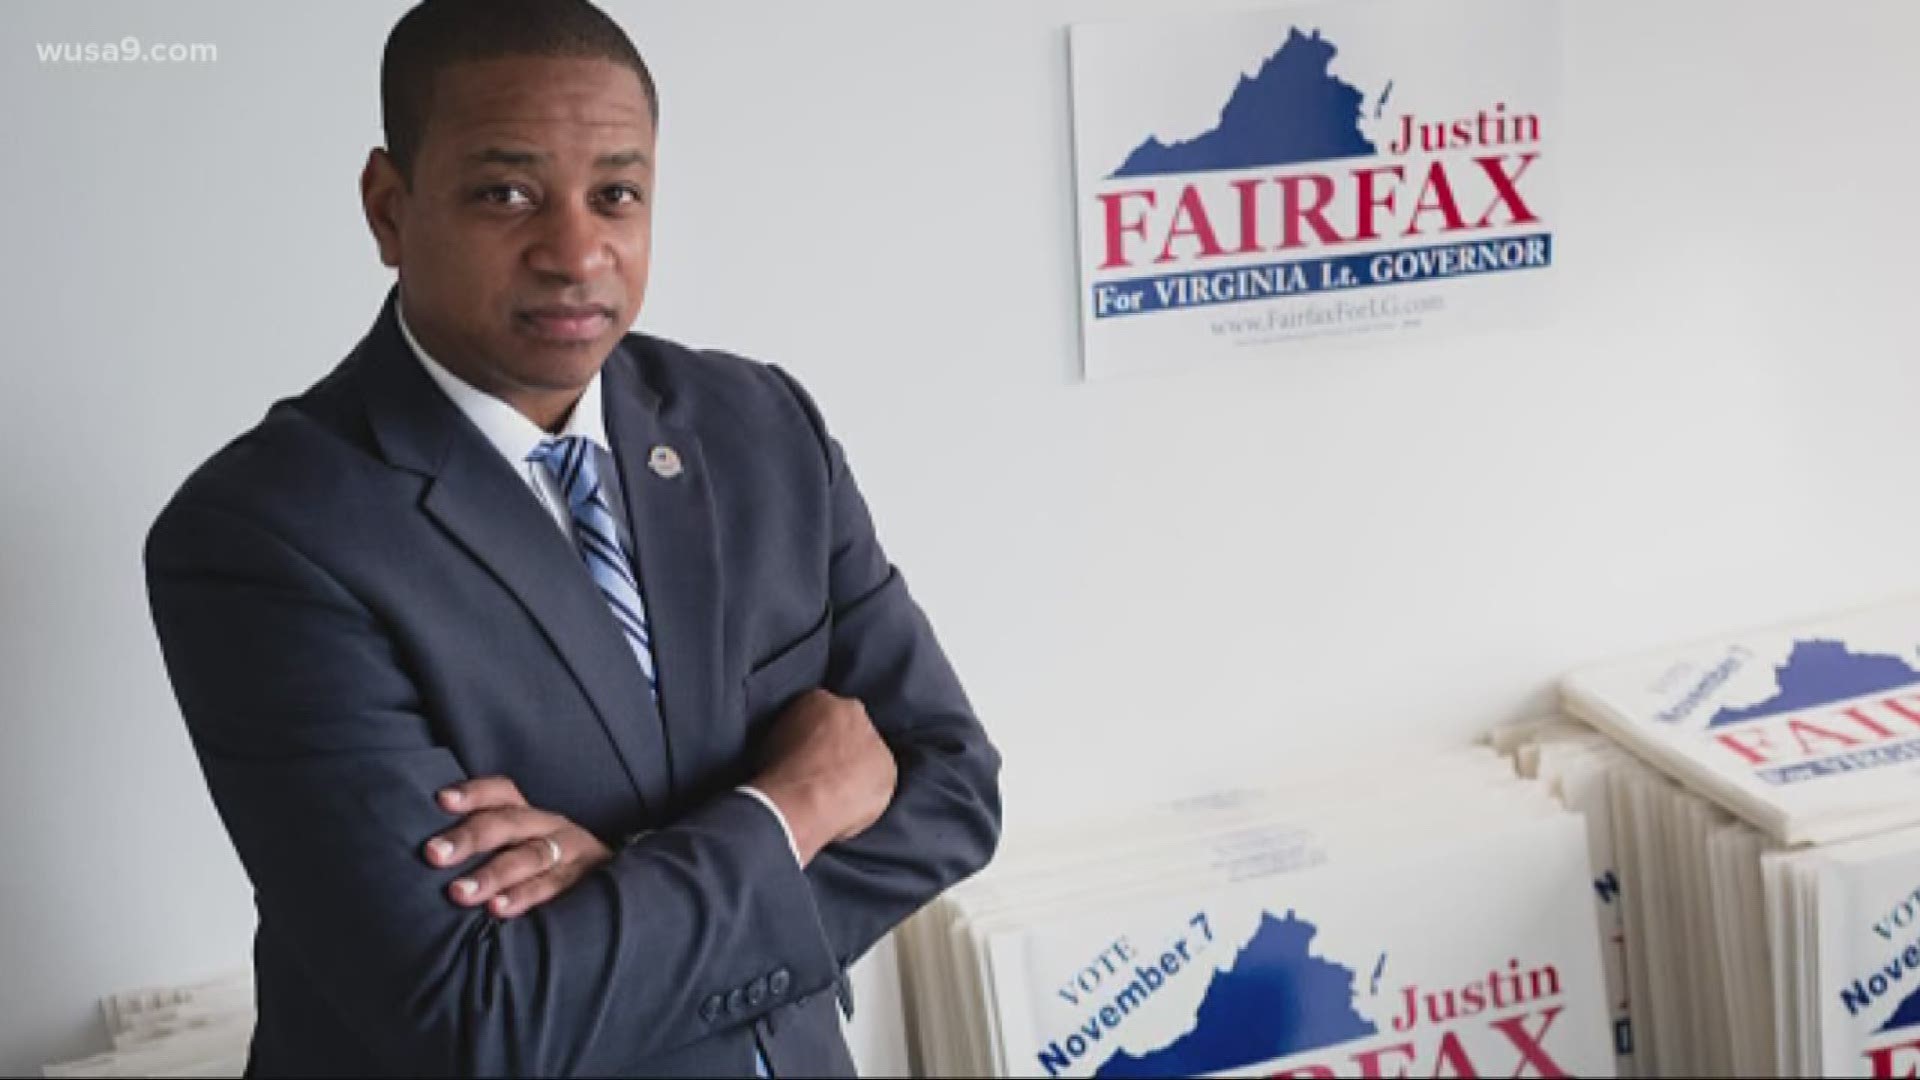 Woman who accused Lieutenant Governor Fairfax of sexual assault comes forward. Julie Jakopic, chair of the Democratic PAC Virginia's List, weighs in.